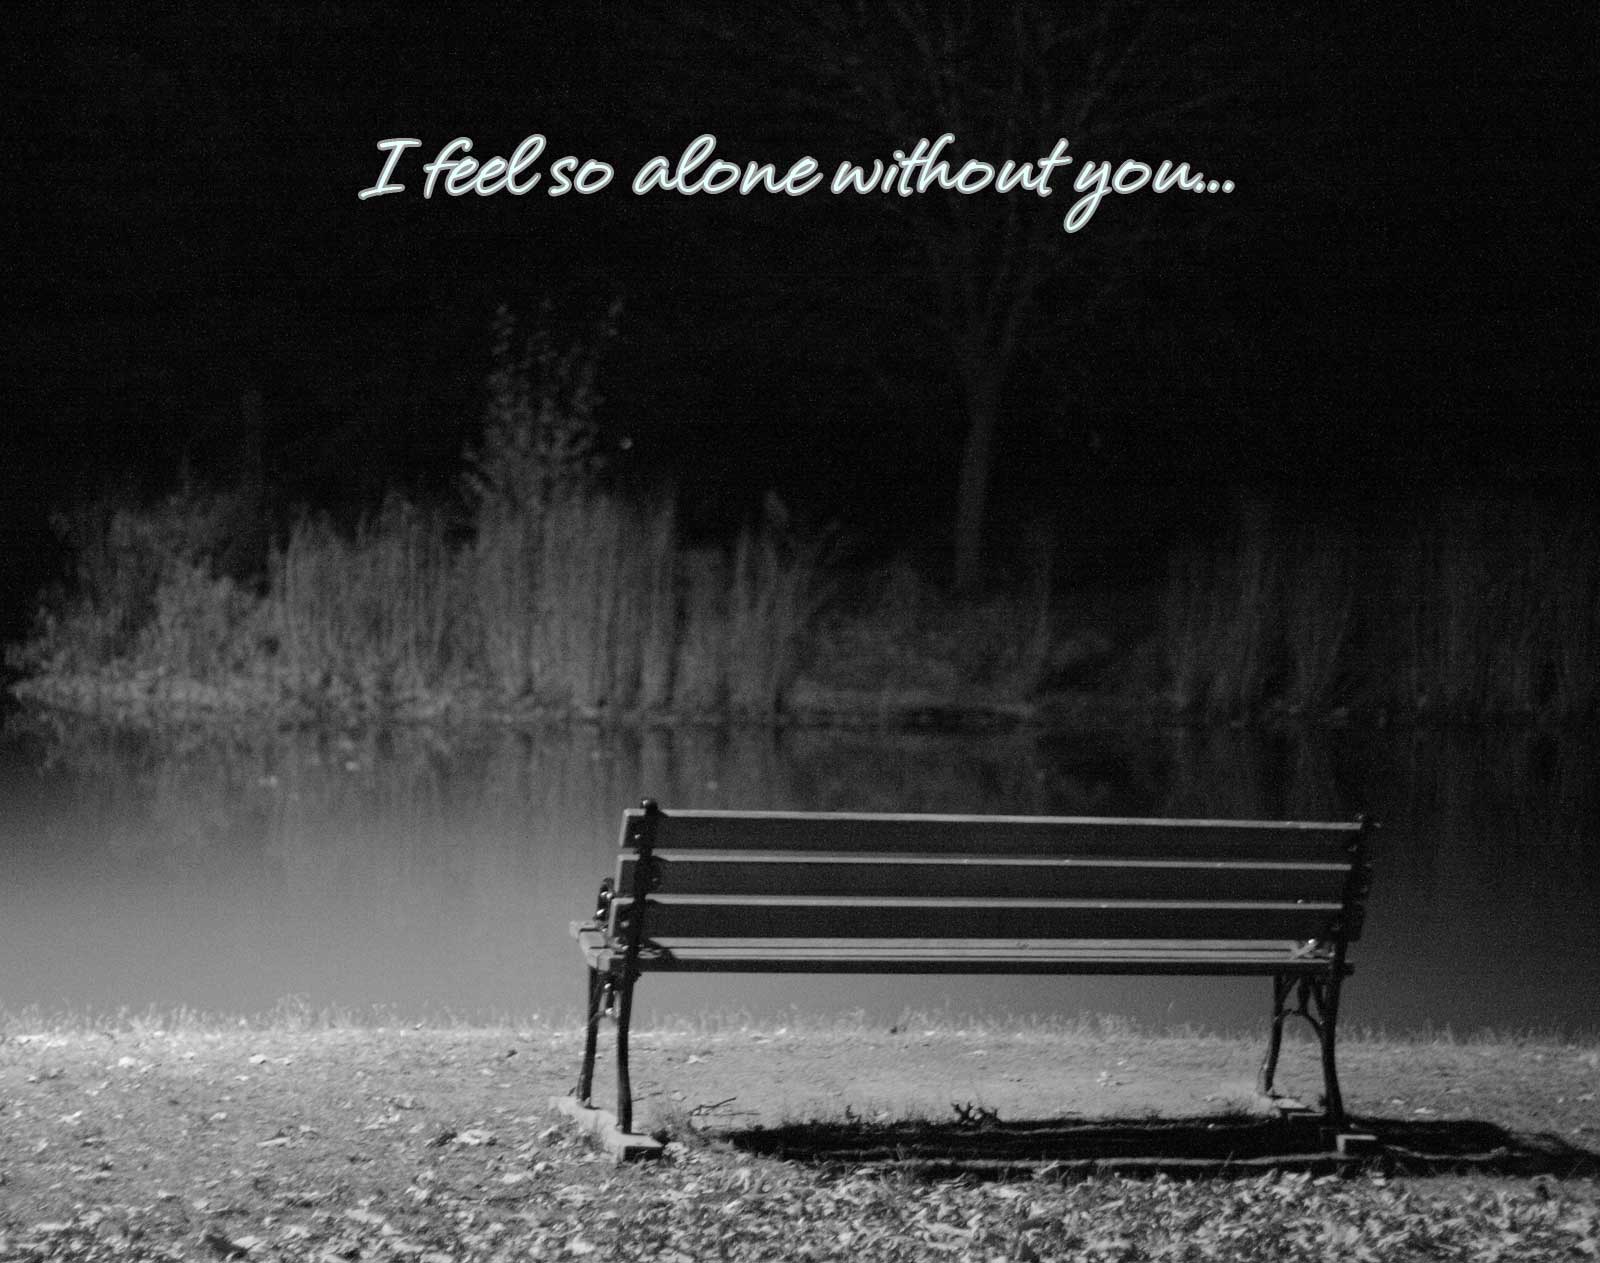 Mobile Sad Love Pictures - Feeling Alone Without Her , HD Wallpaper & Backgrounds